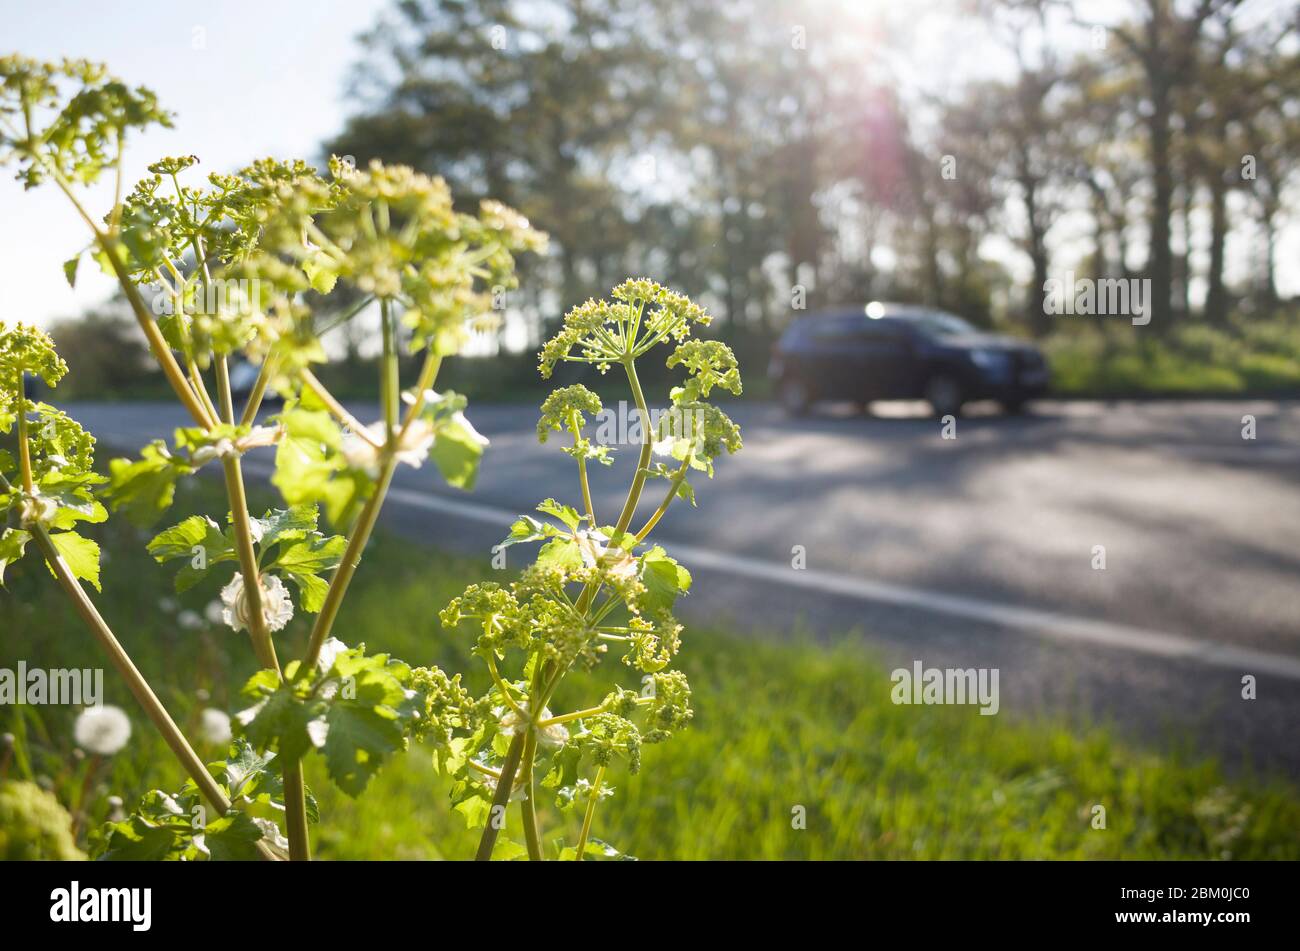 Close up shallow depth of field of British roadside Monster Hemlock weeds with car blurred in the background backlit by the sun. Stock Photo